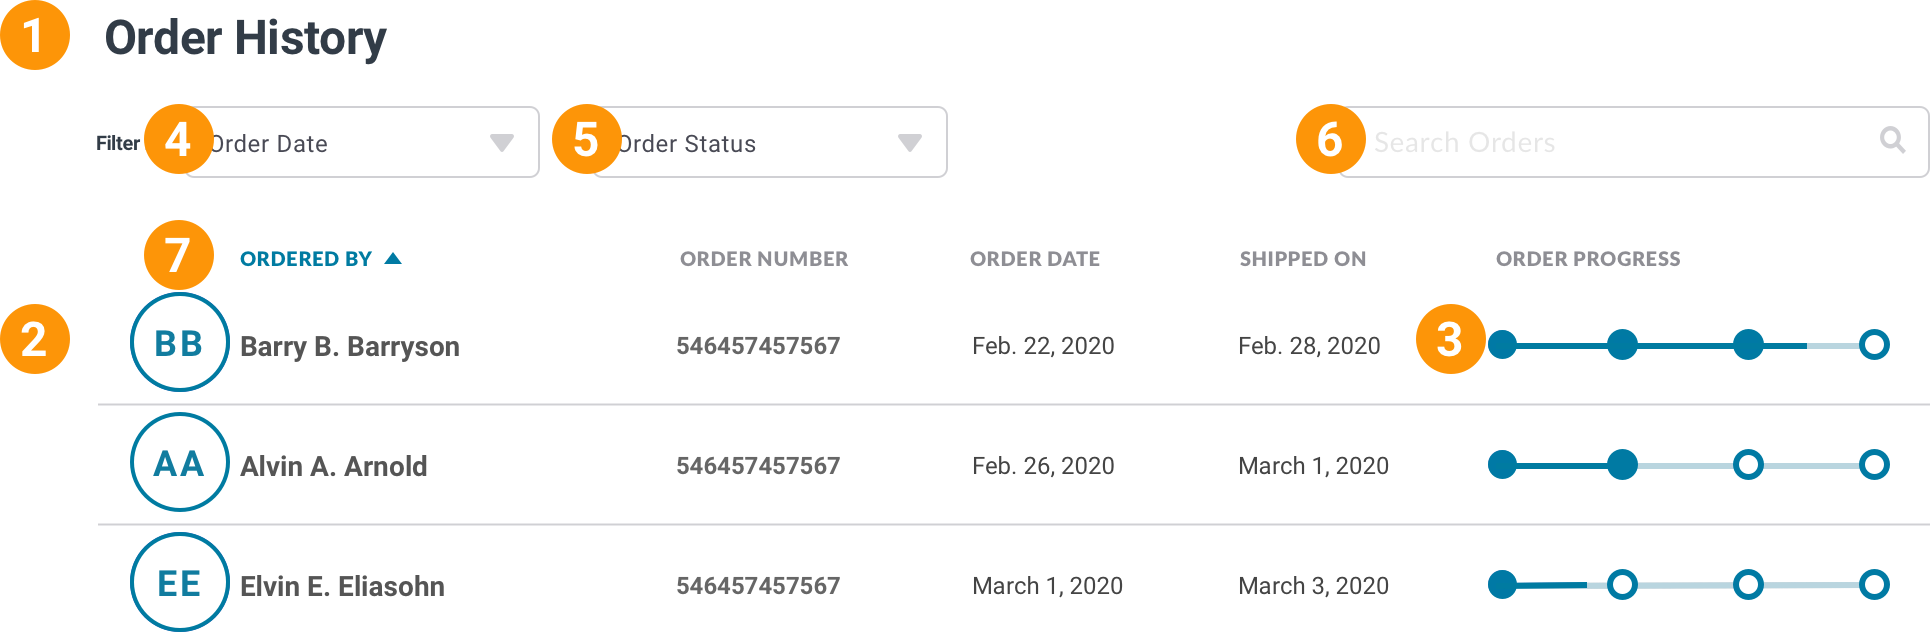 A screenshot of a page with the header Order History. It contains a filter bar with two selects, a search field and a table row with the user's intials, user's name, order number, order date, order ship date and a progress bar showing the order has shipped.